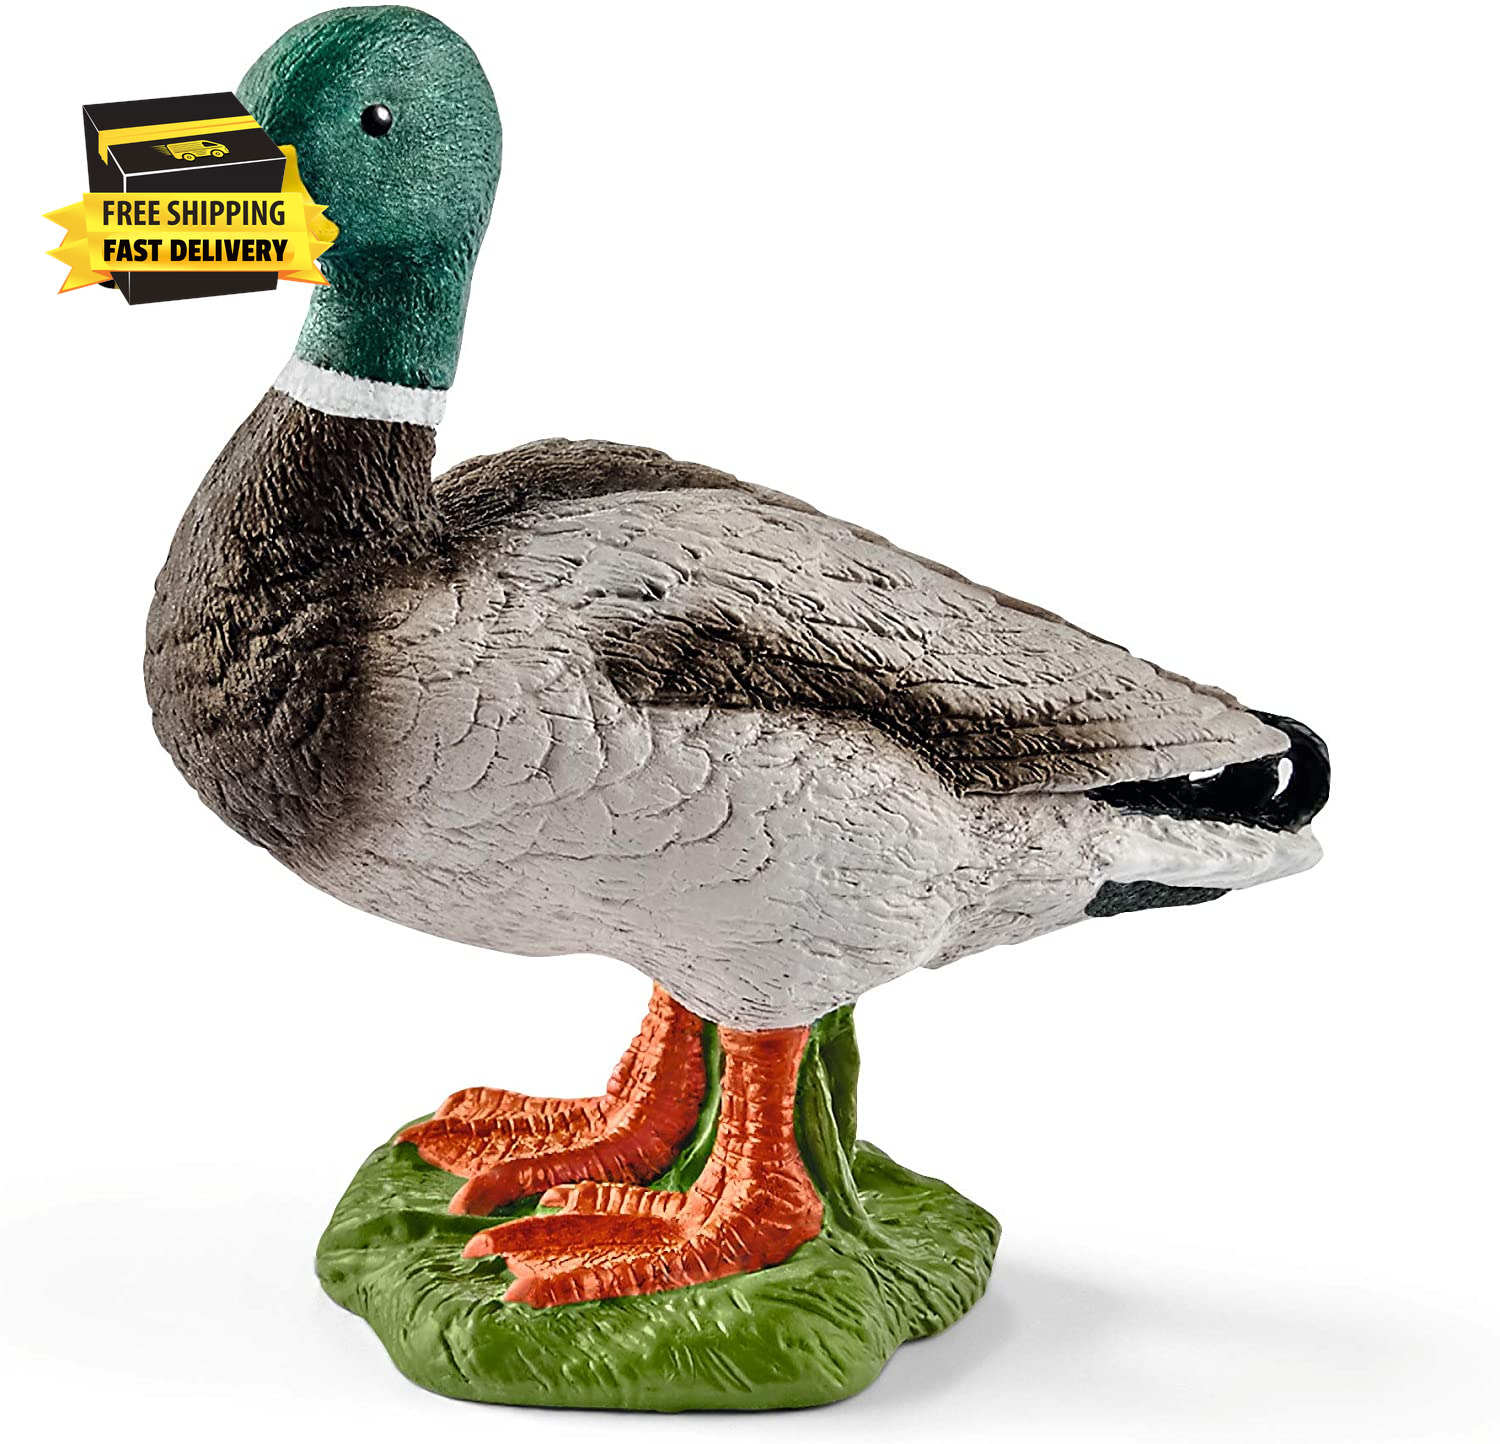 Farm World Duck Toy Figurine - Highly Detailed and Durable Farm Animal Toy, Fun 